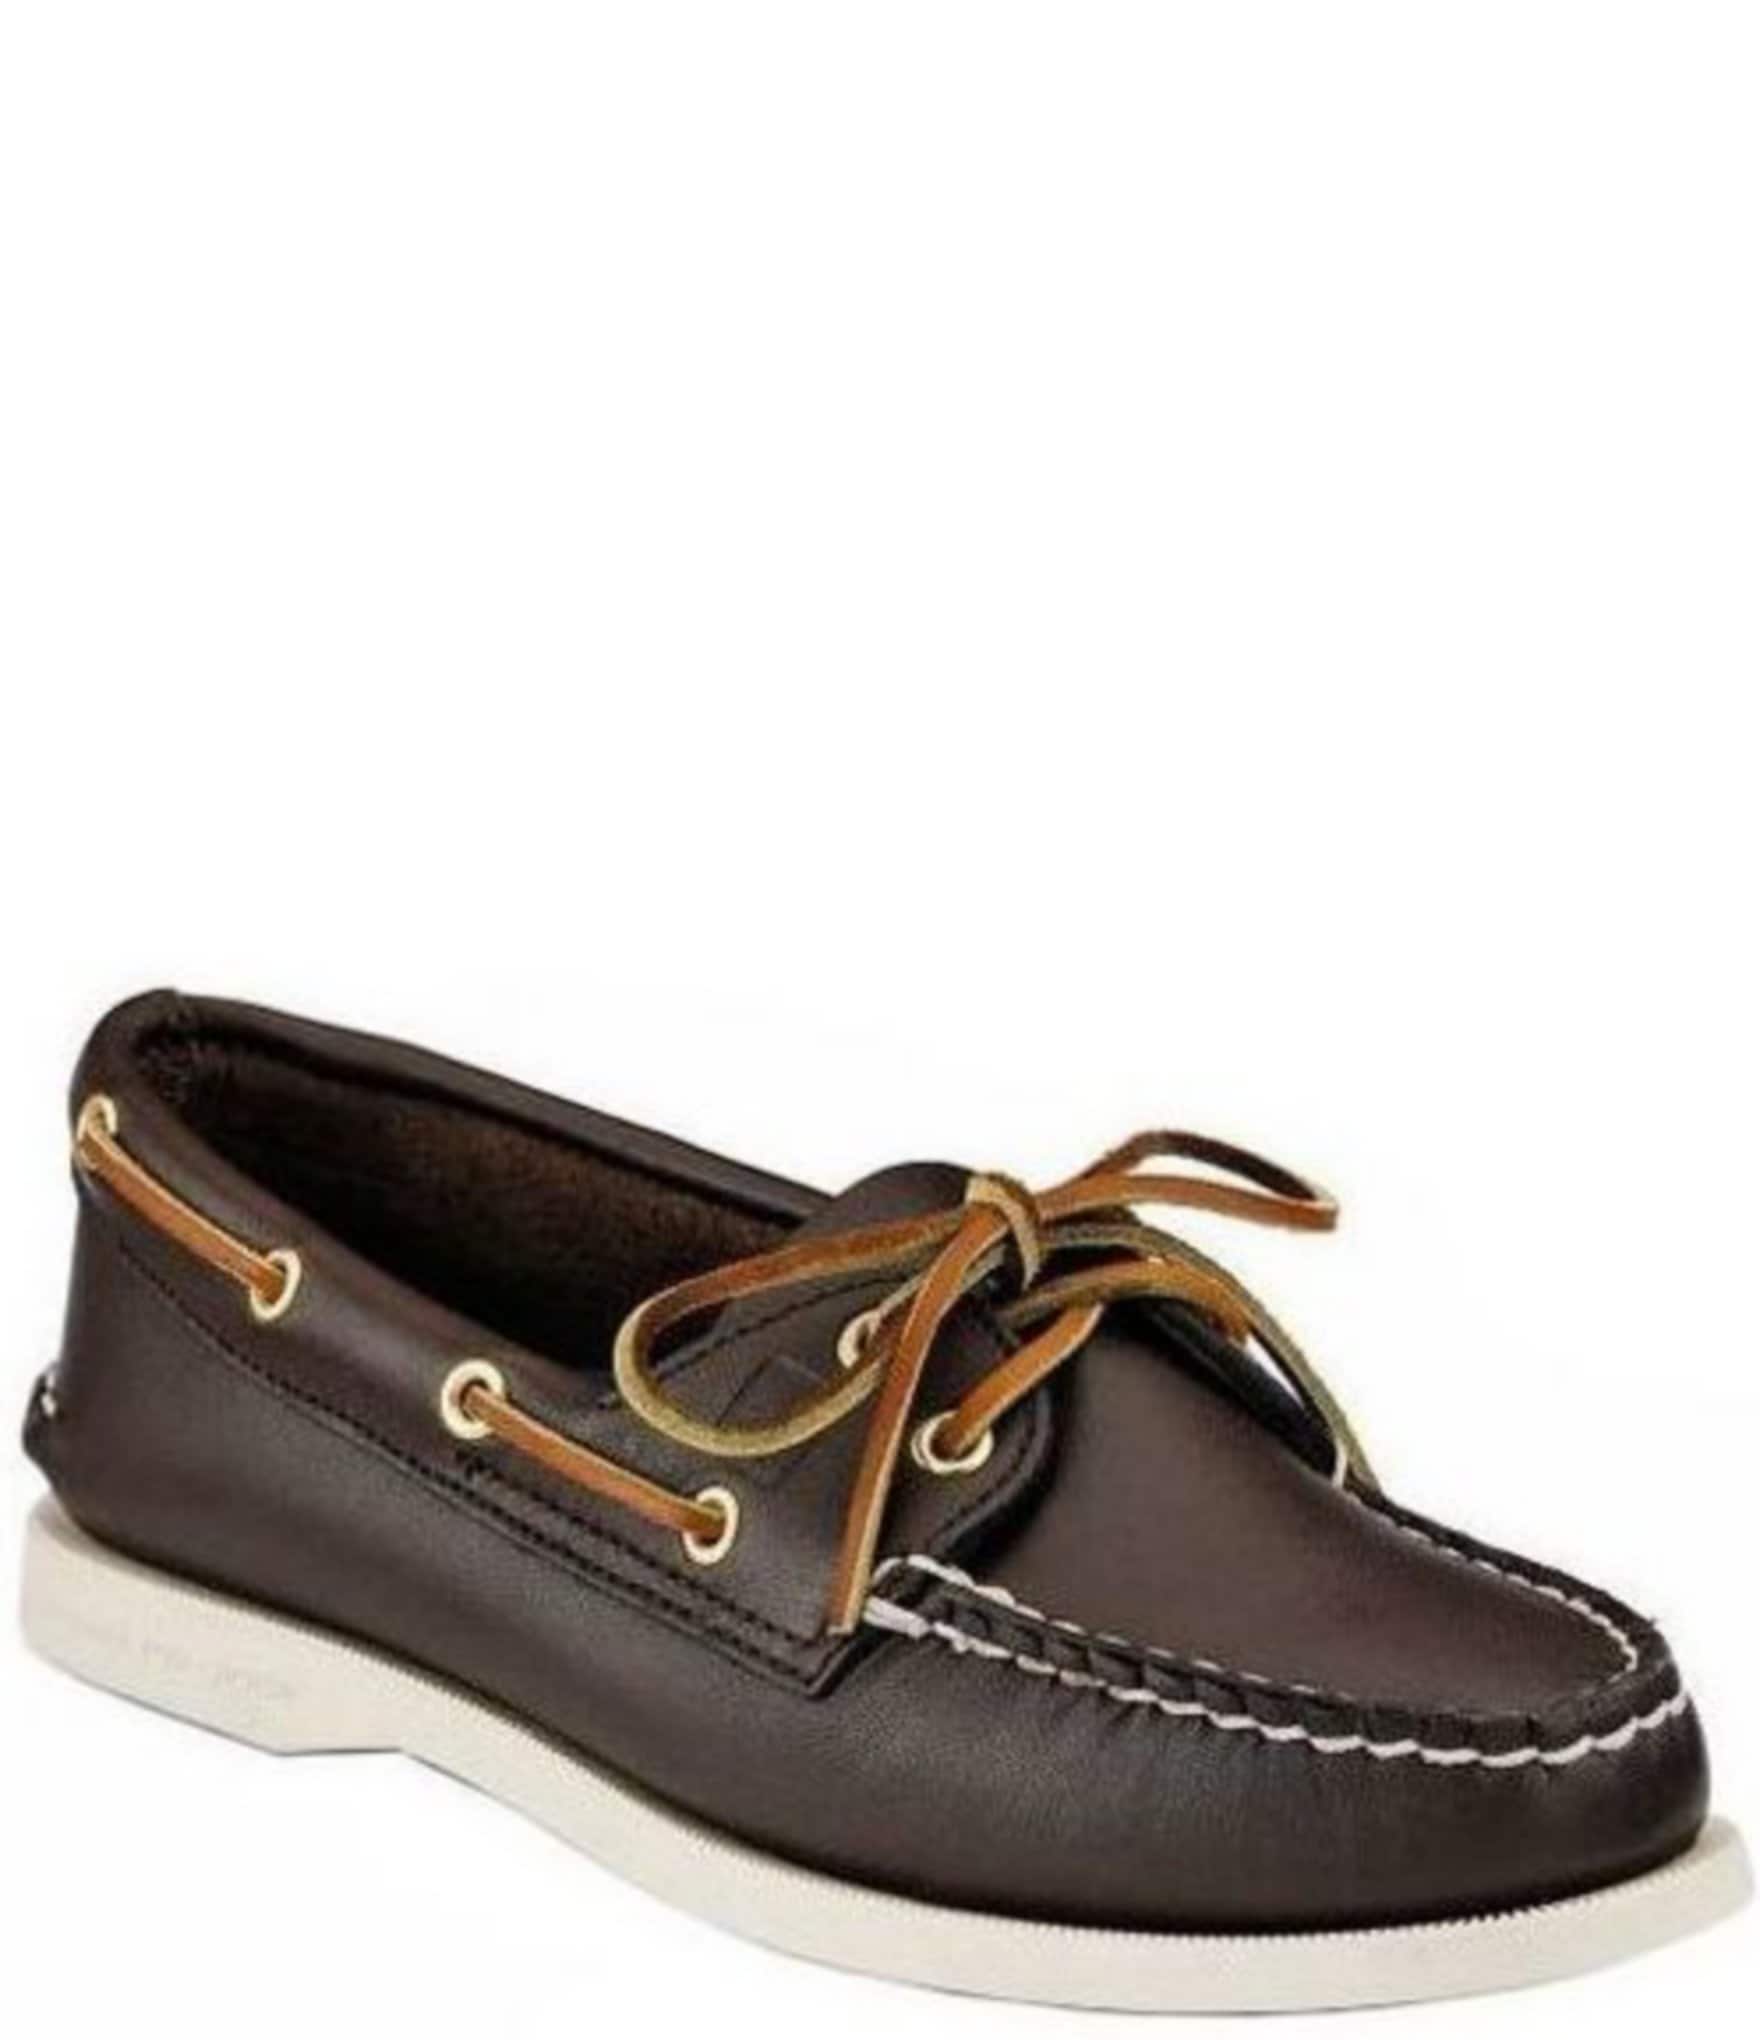 Sperry Top-Sider Authentic Original 2 